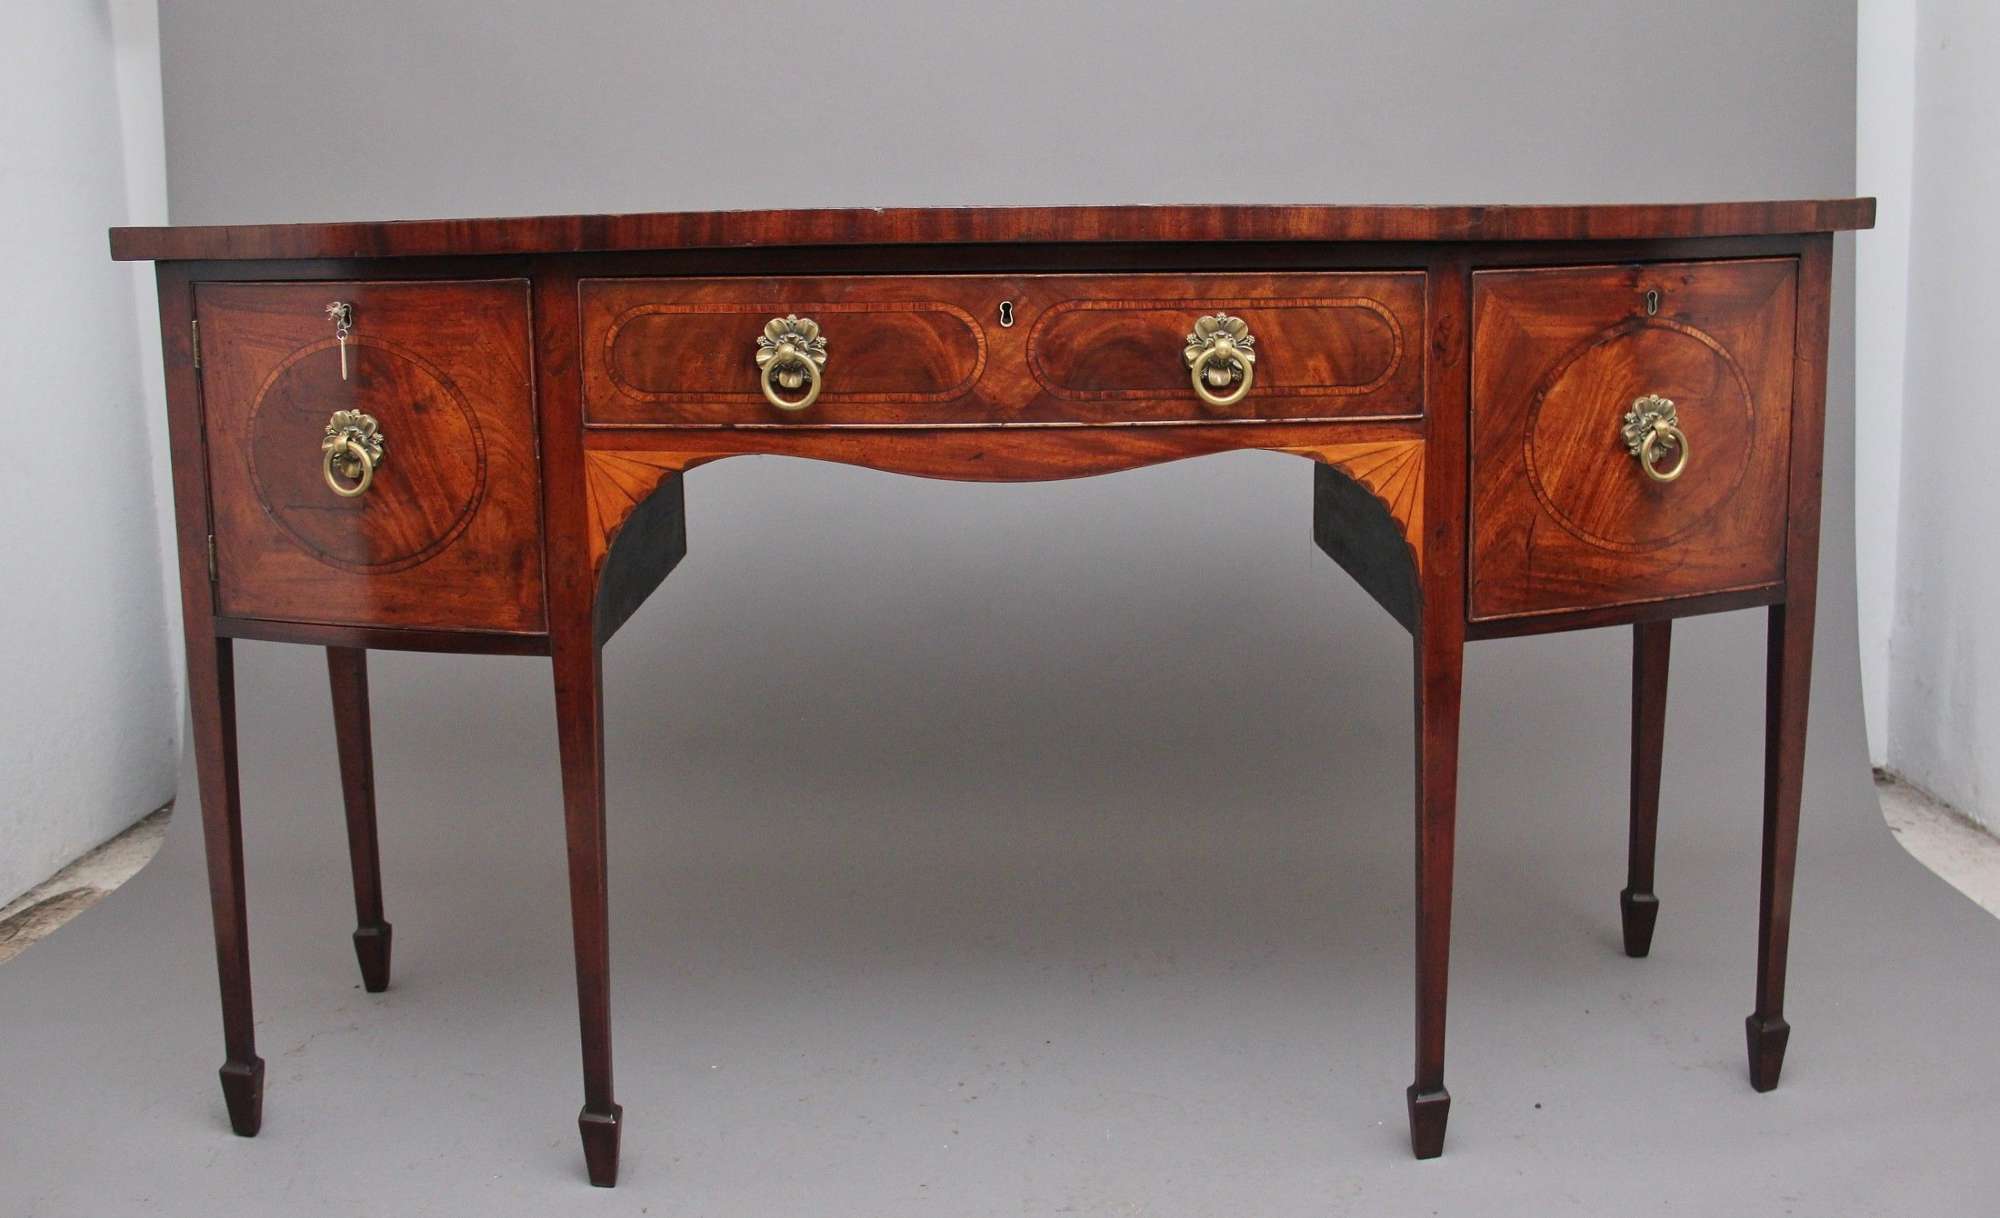 Early 19th Century Inlaid Mahogany Bow Front Antique Sideboard